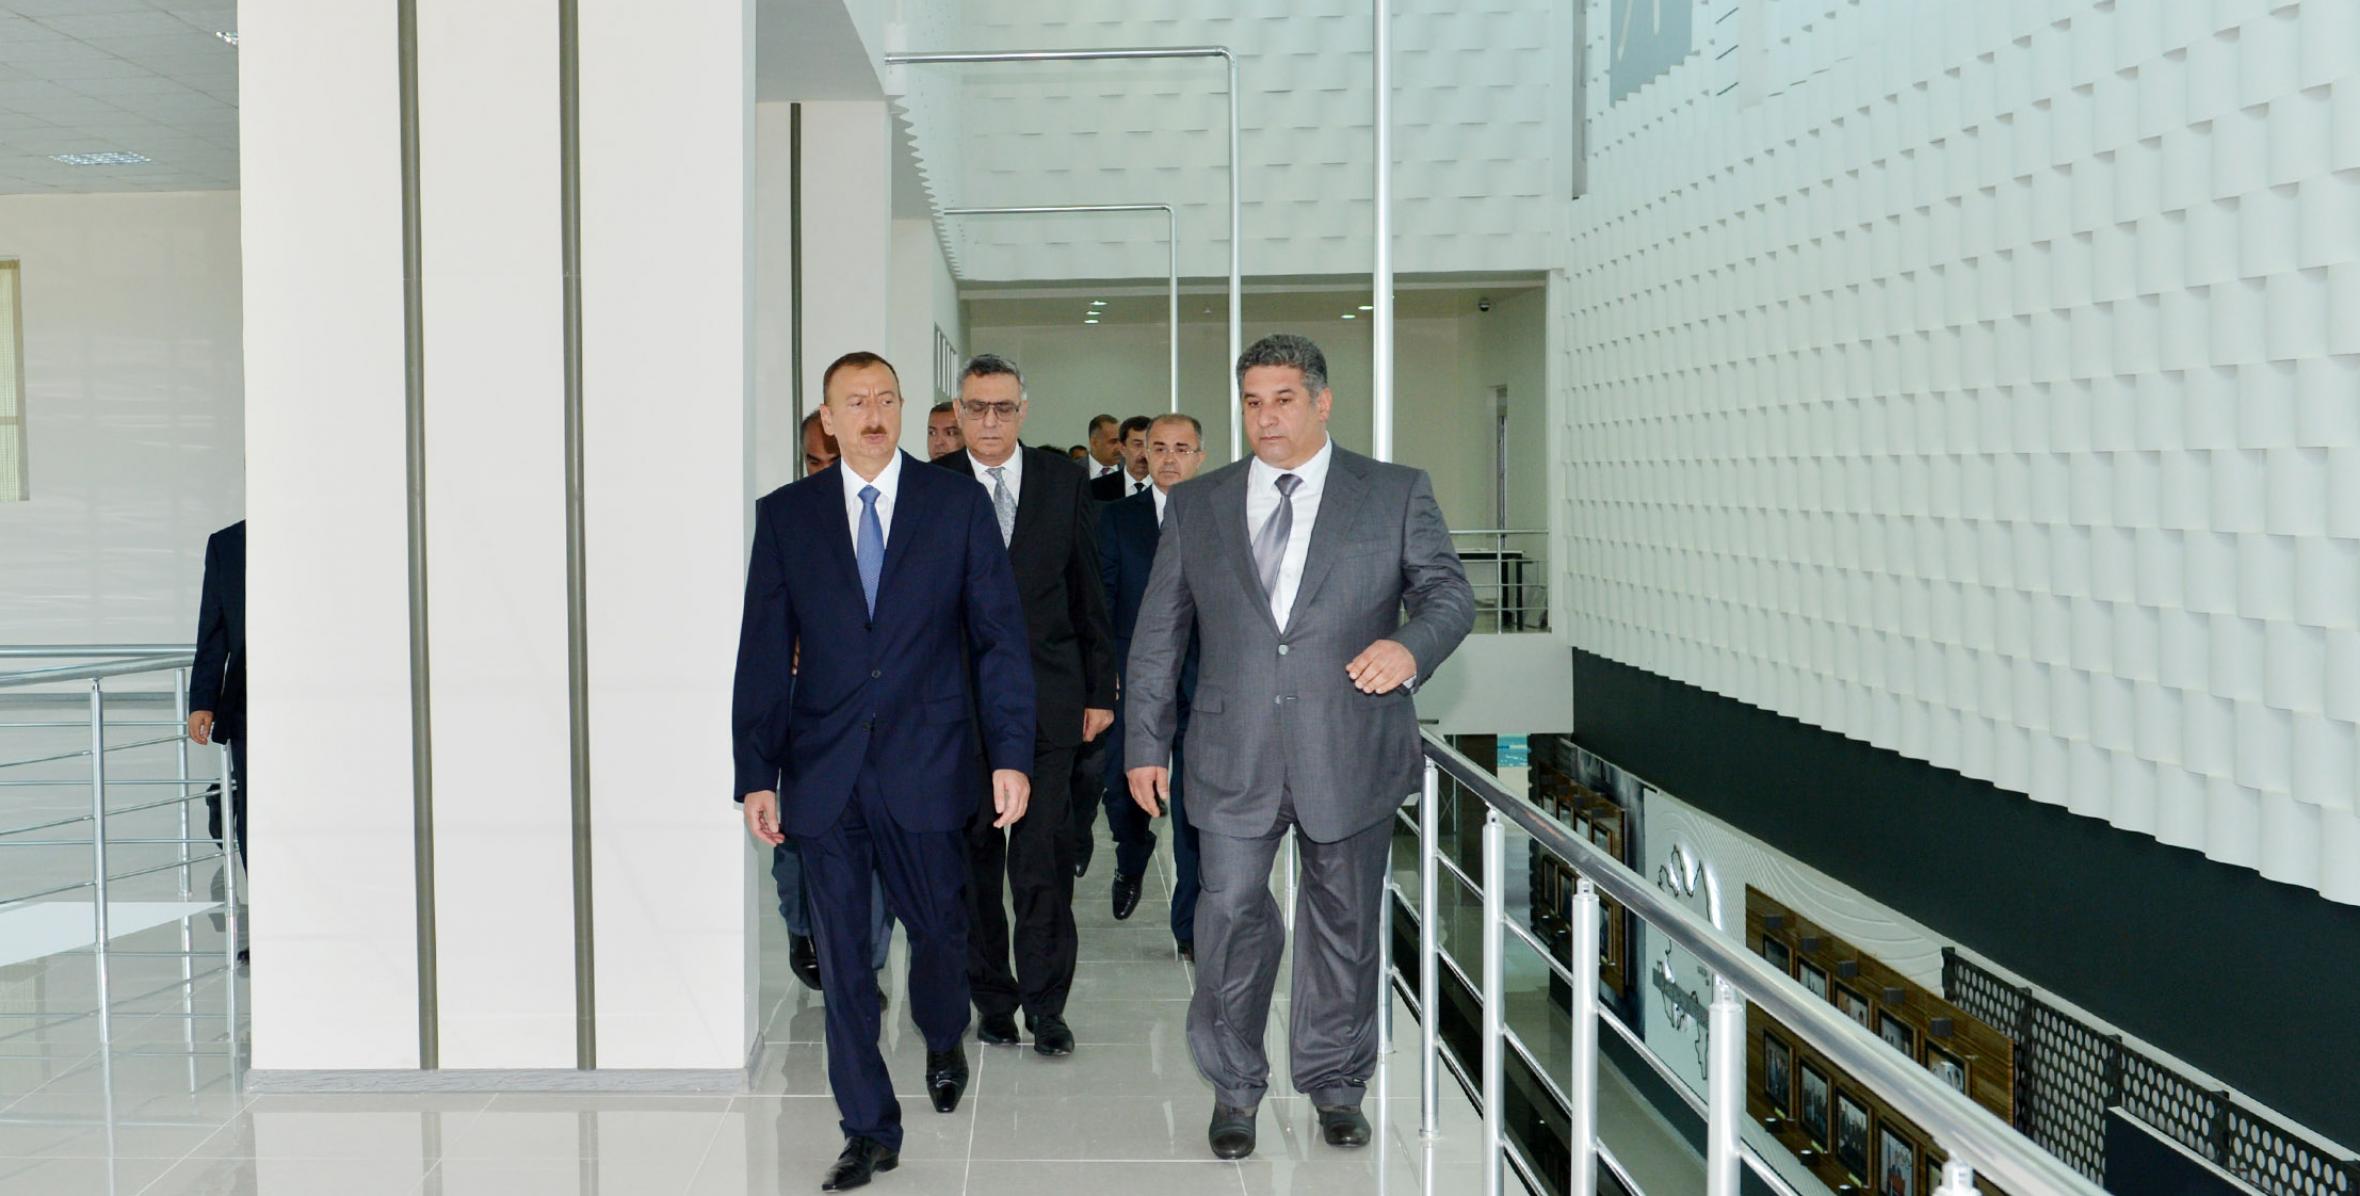 Ilham Aliyev attended the opening of the Shirvan Olympic Sports Center